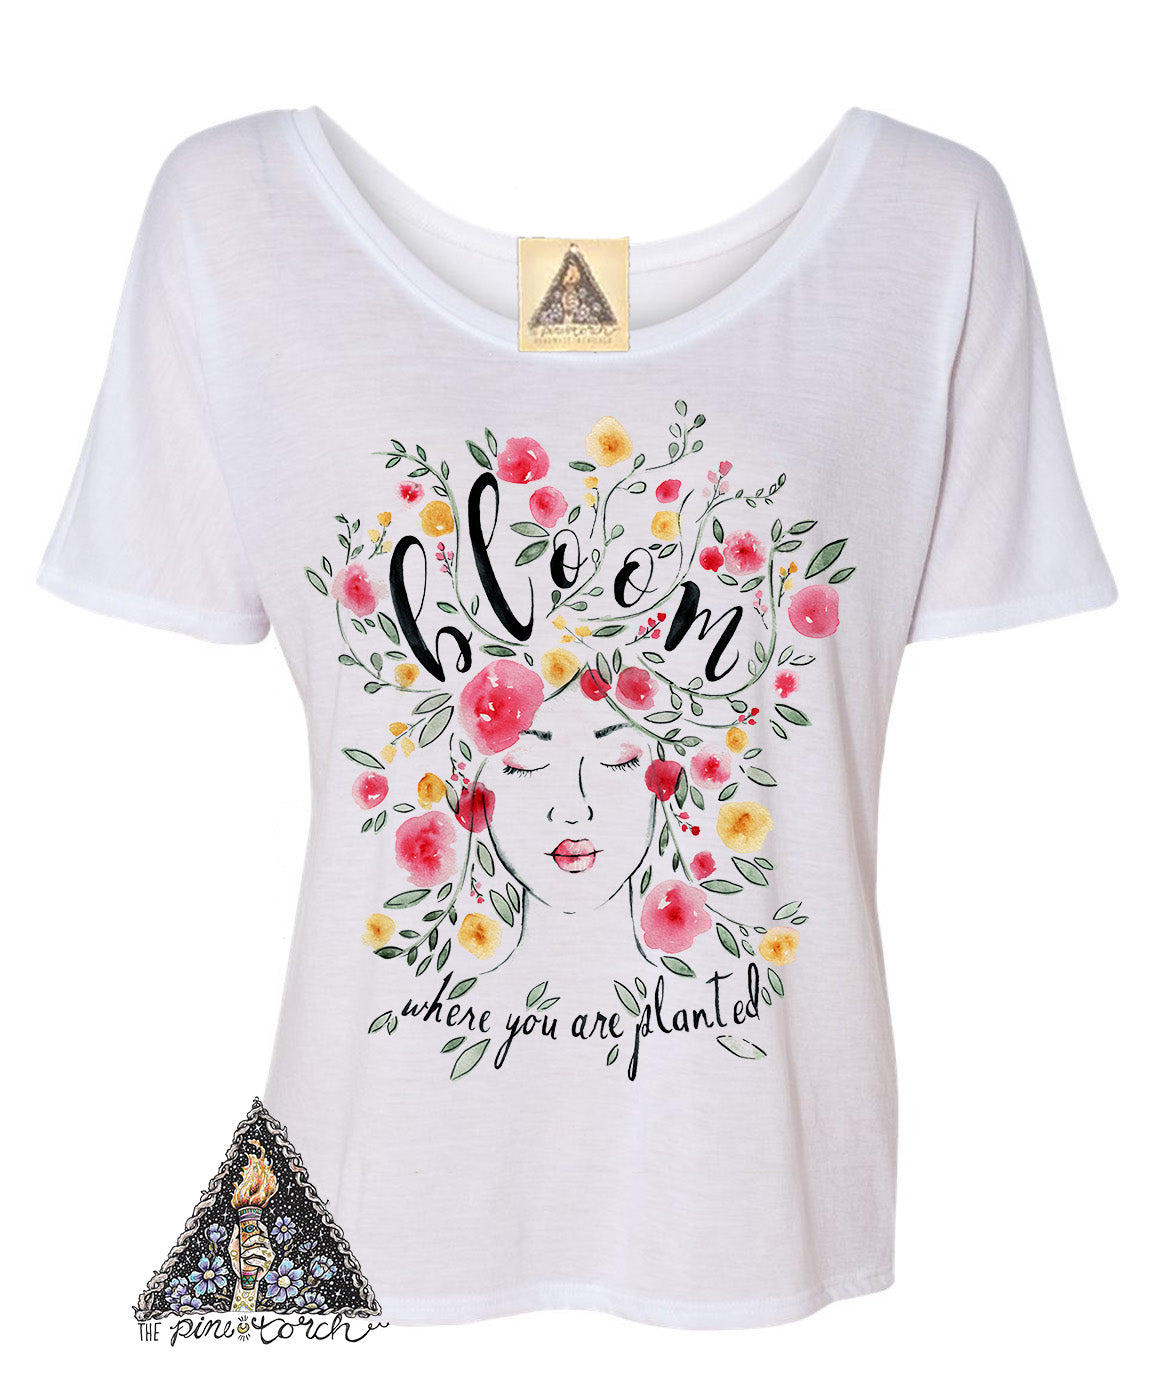 « BLOOM WHERE YOU ARE PLANTED » WOMEN'S SLOUCHY OR UNISEX TEE